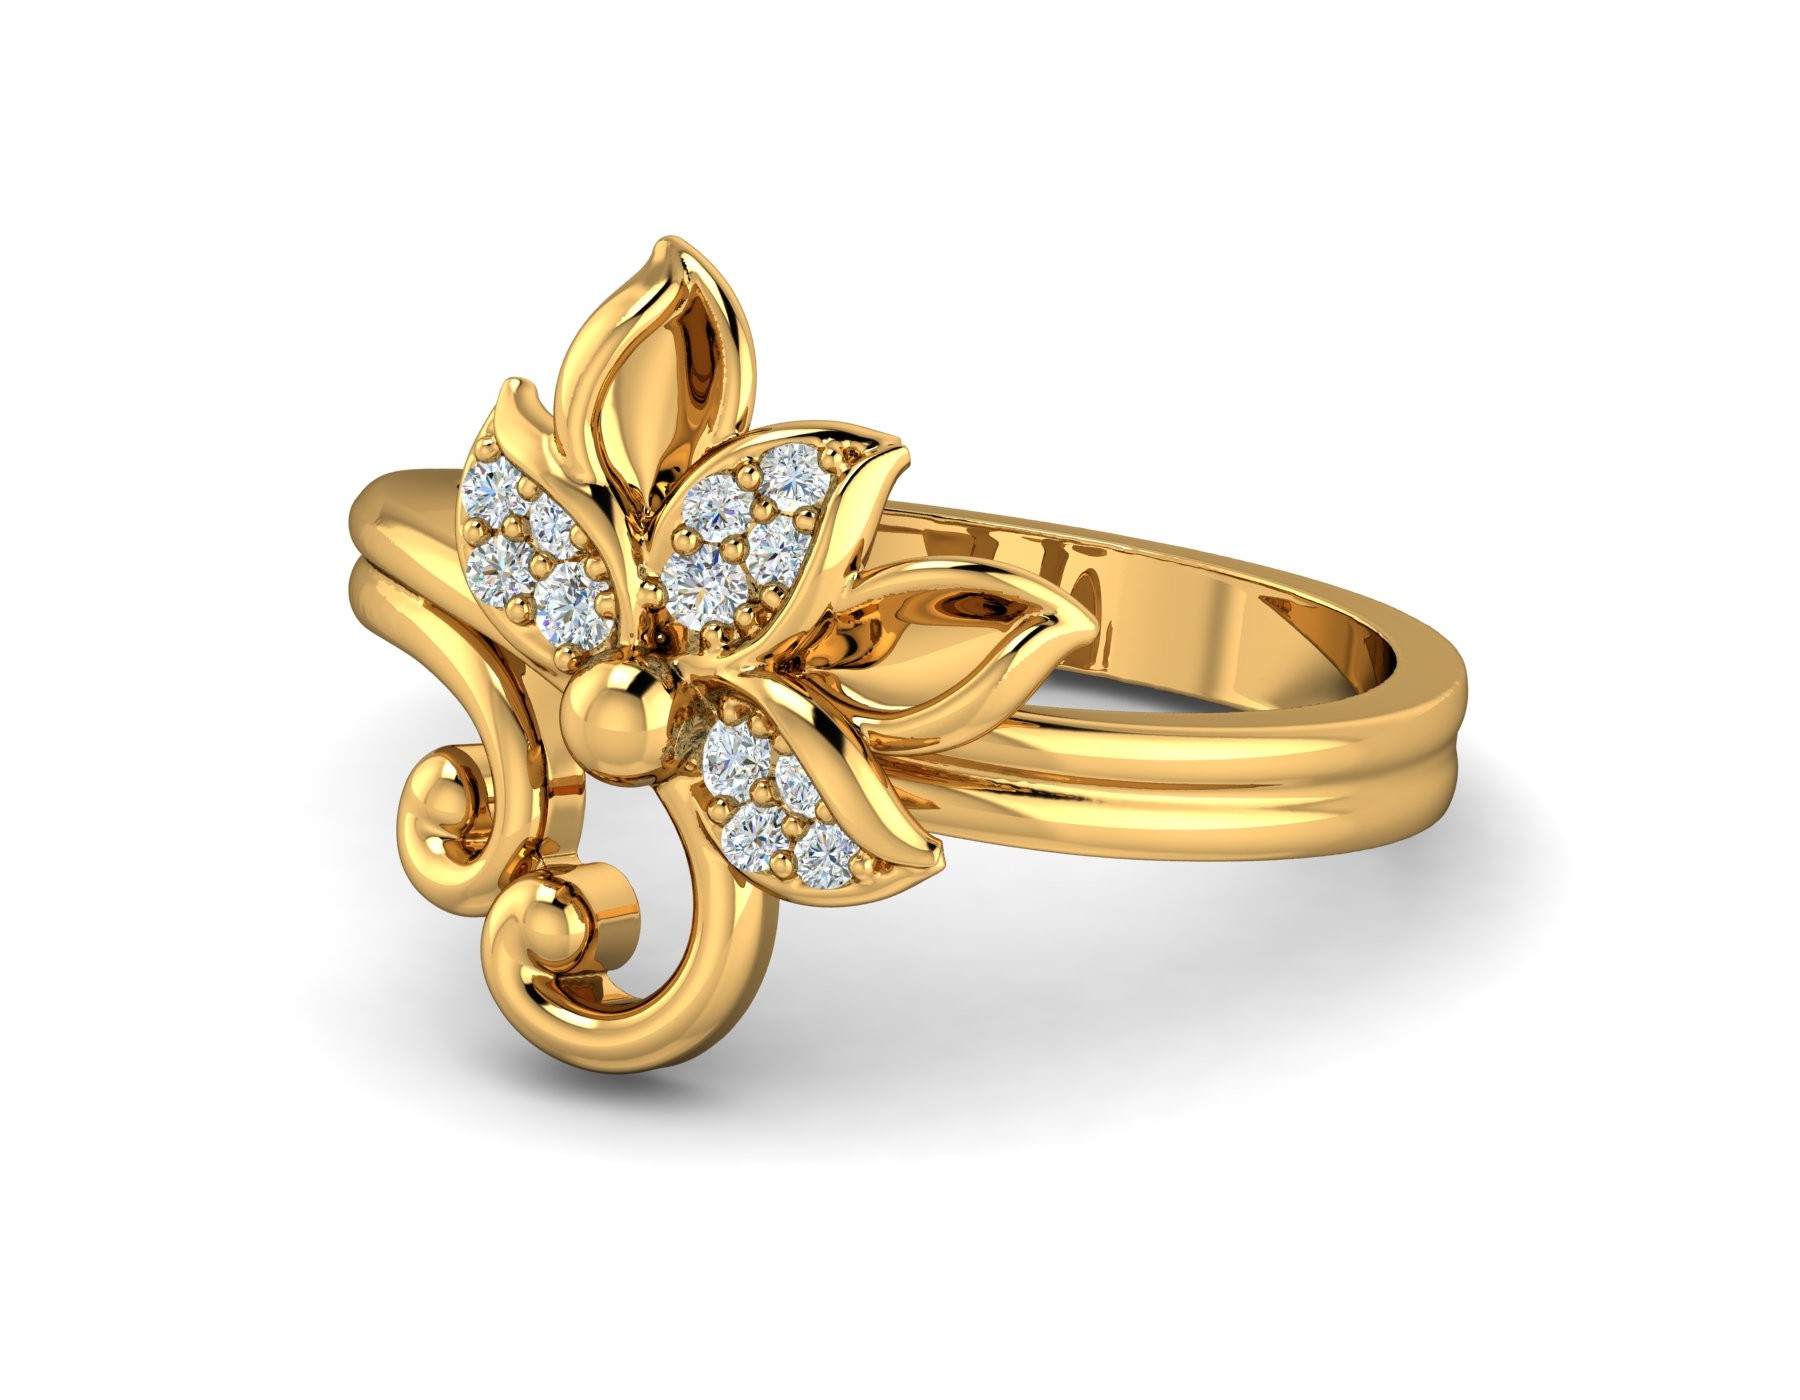 Buy quality The Flower Gold Casting Ring in Pune